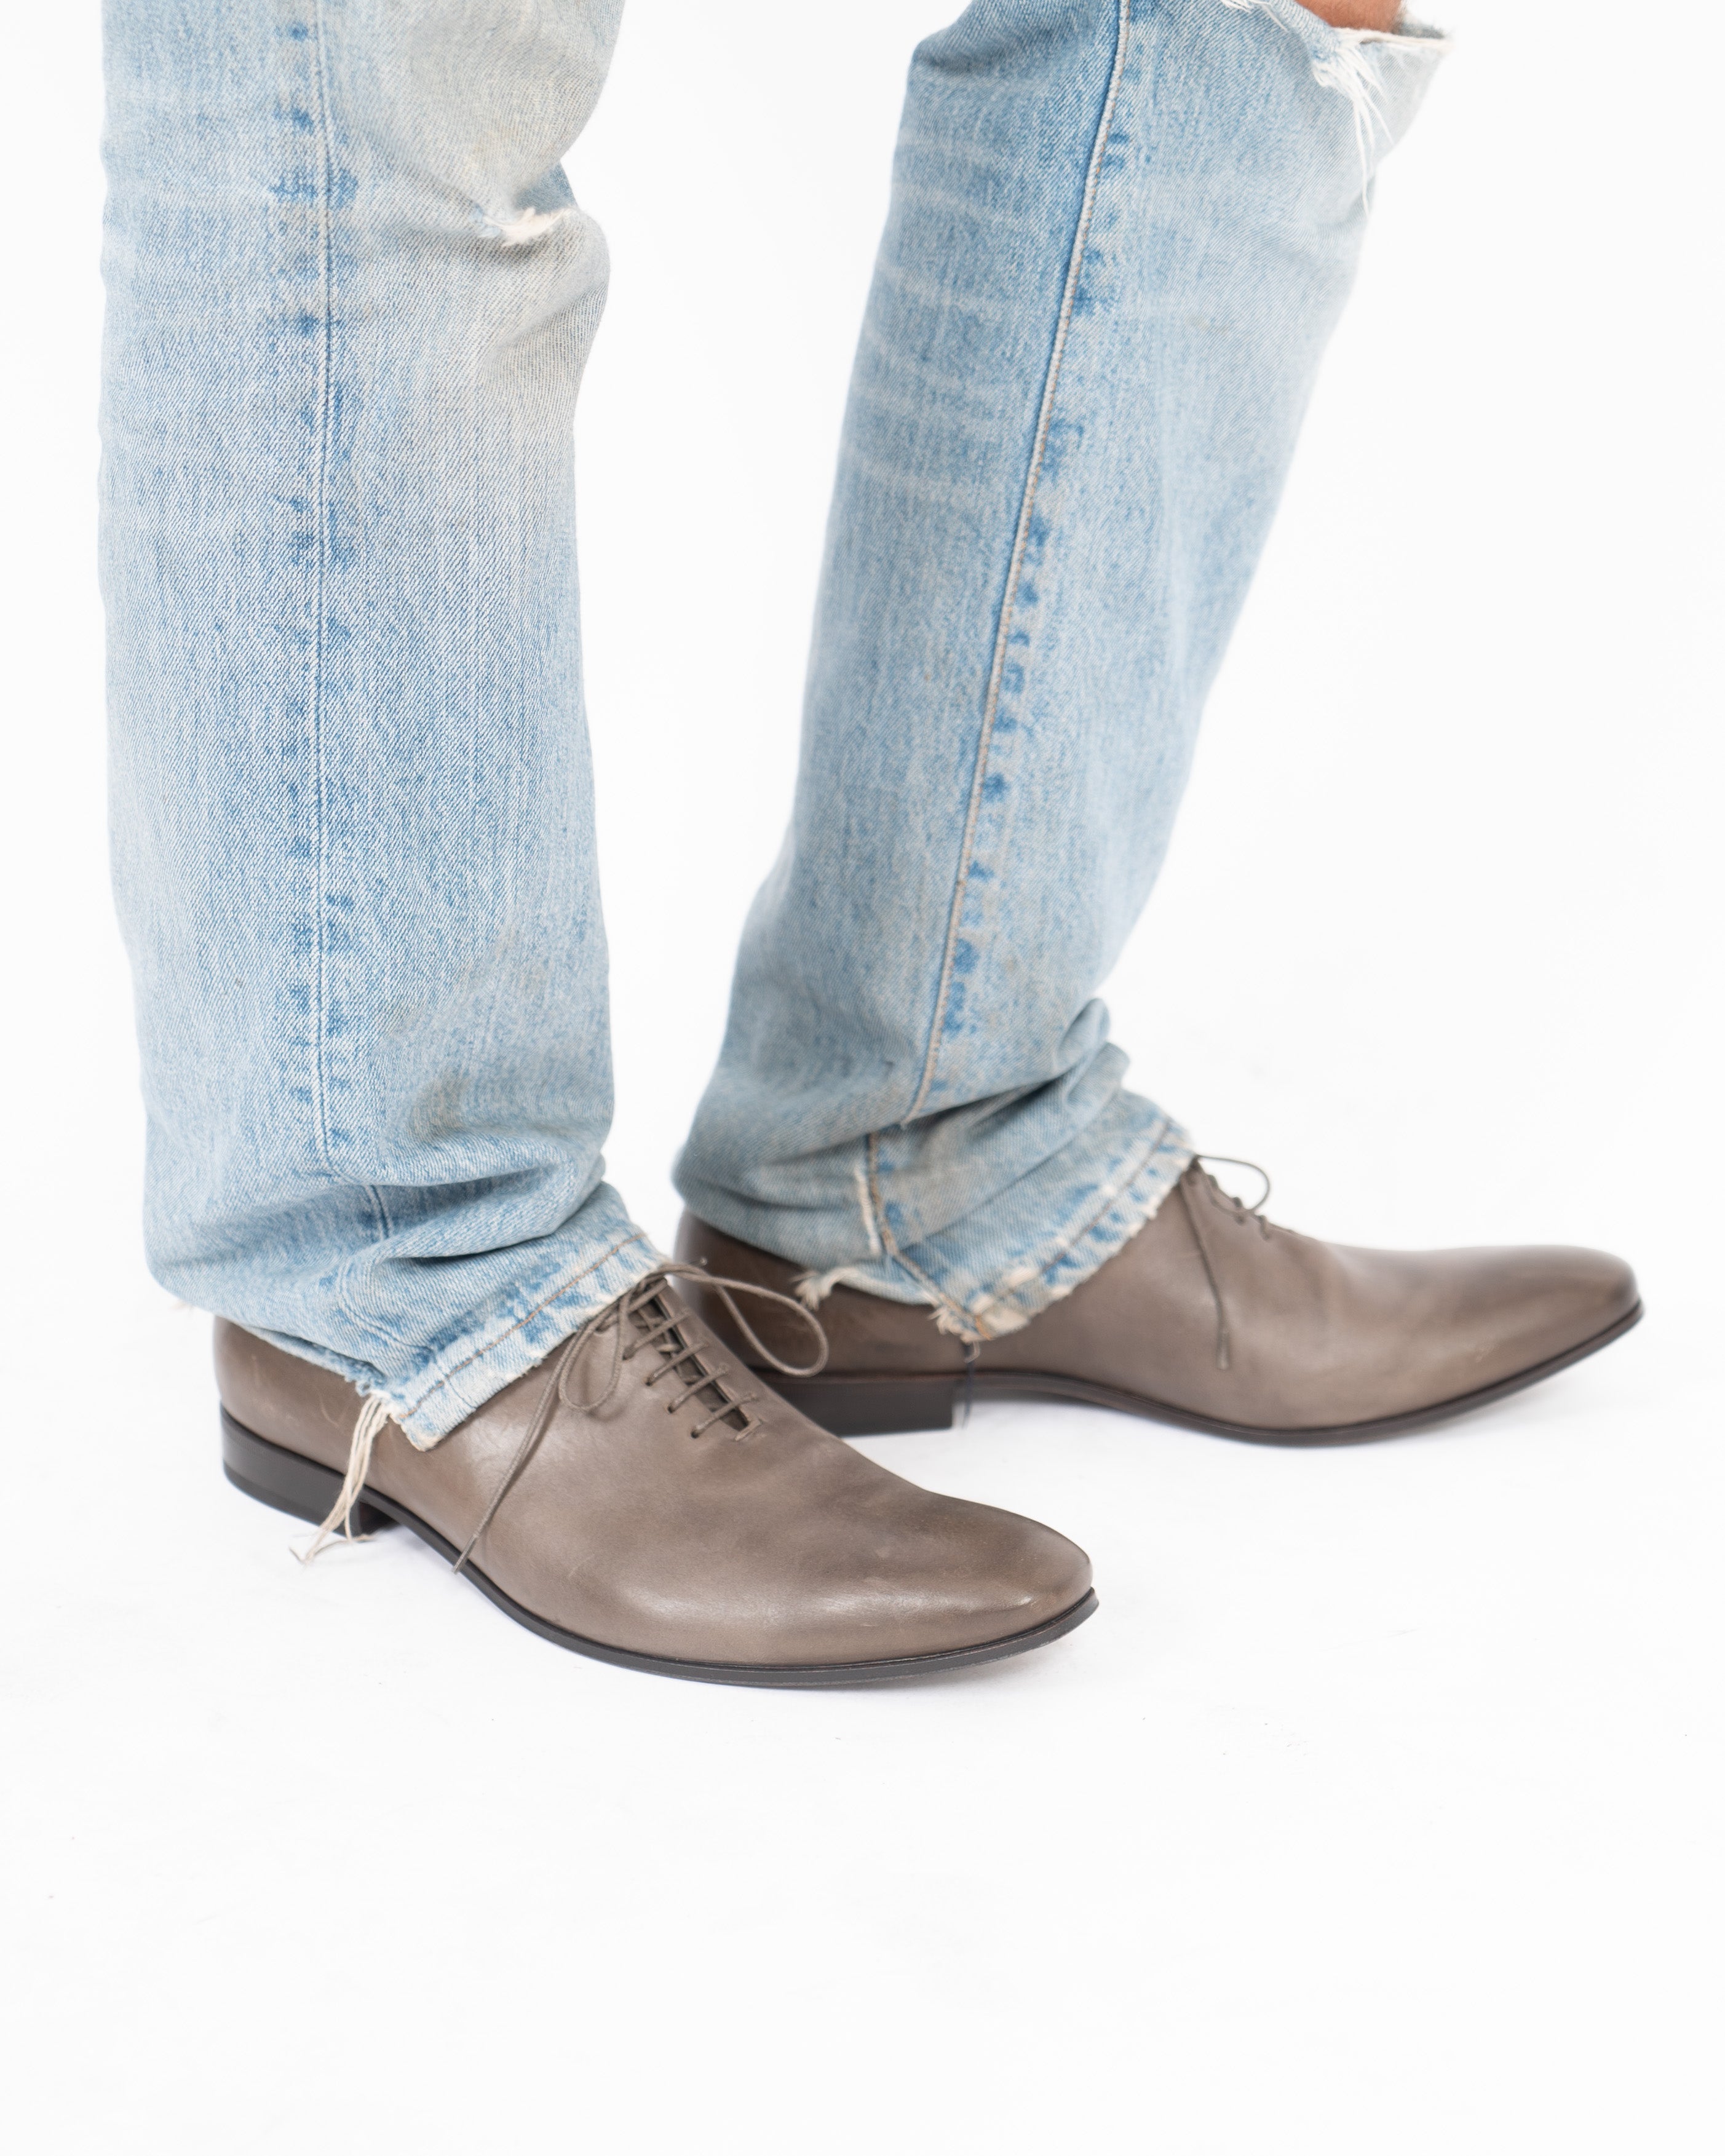 SS15 Chocolate Brown Leather Derbies